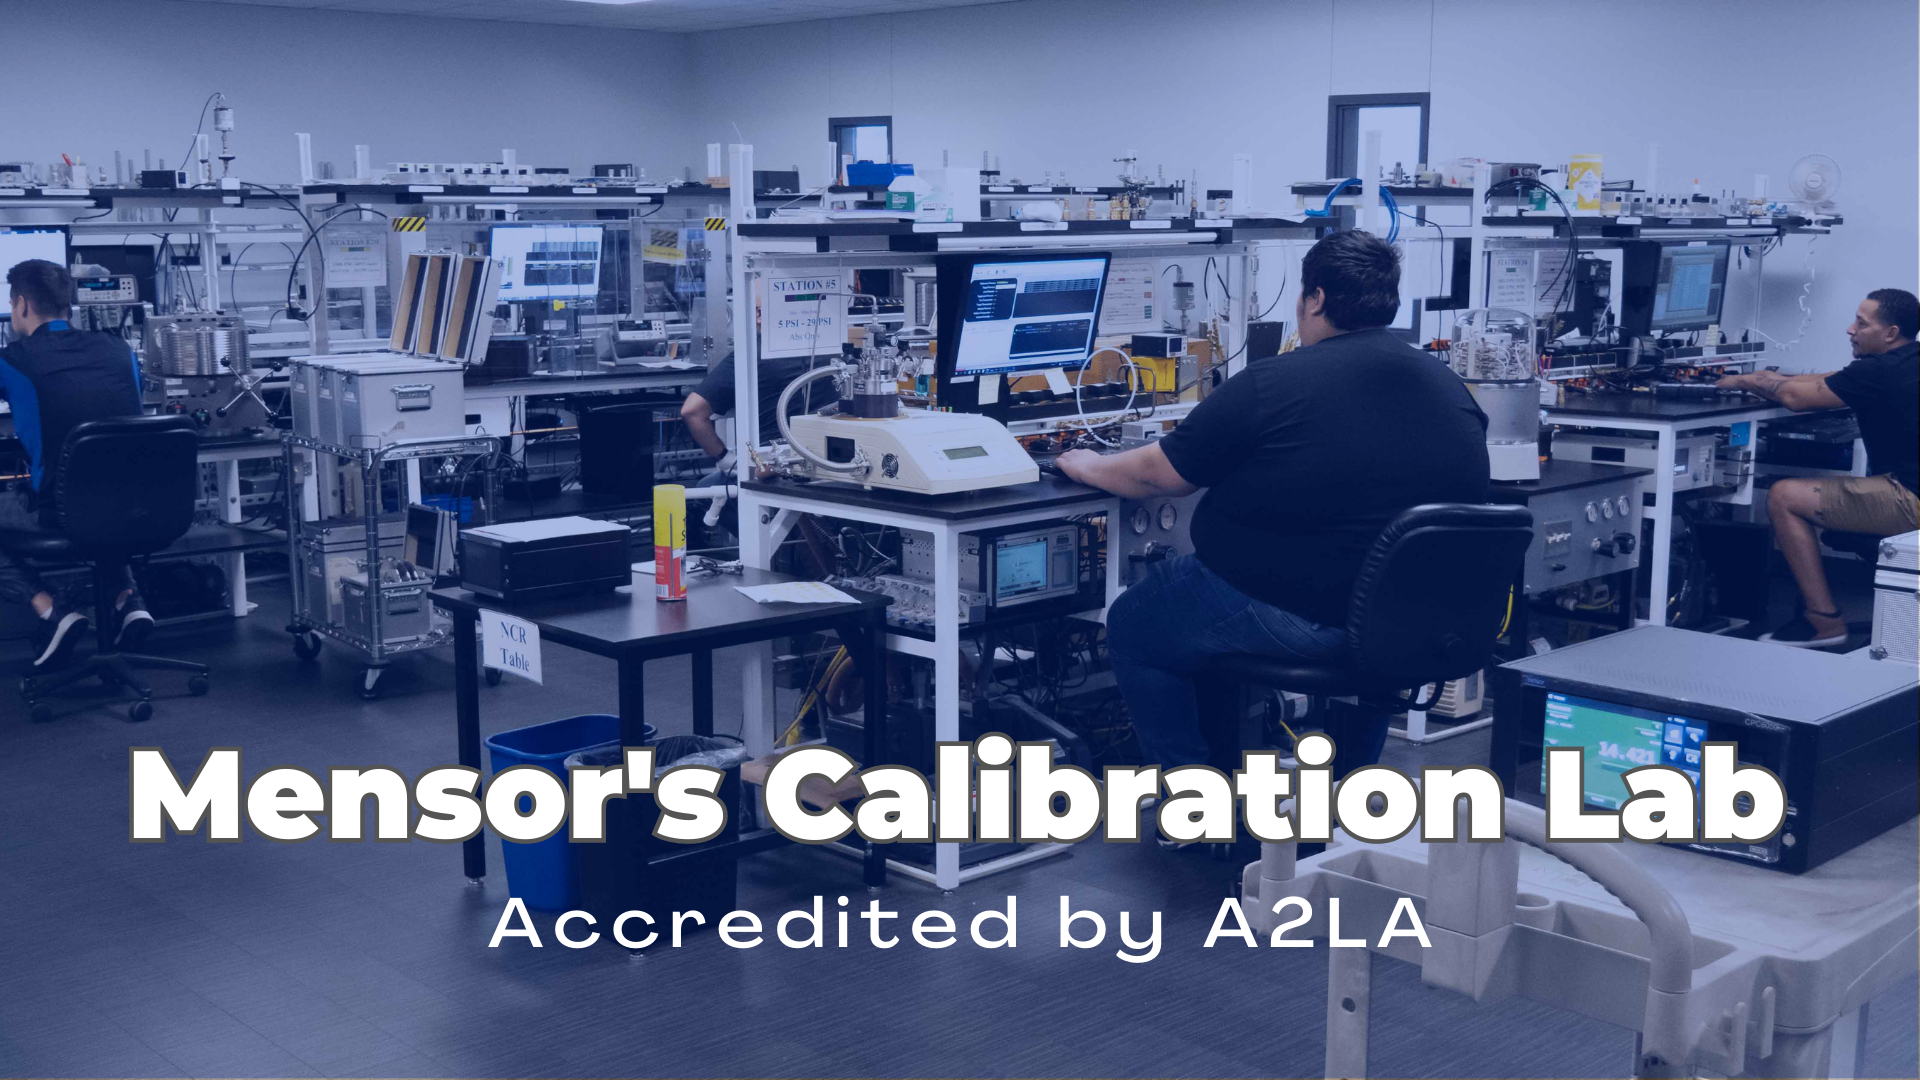 Mensors Calibration Lab Accredited by A2LA